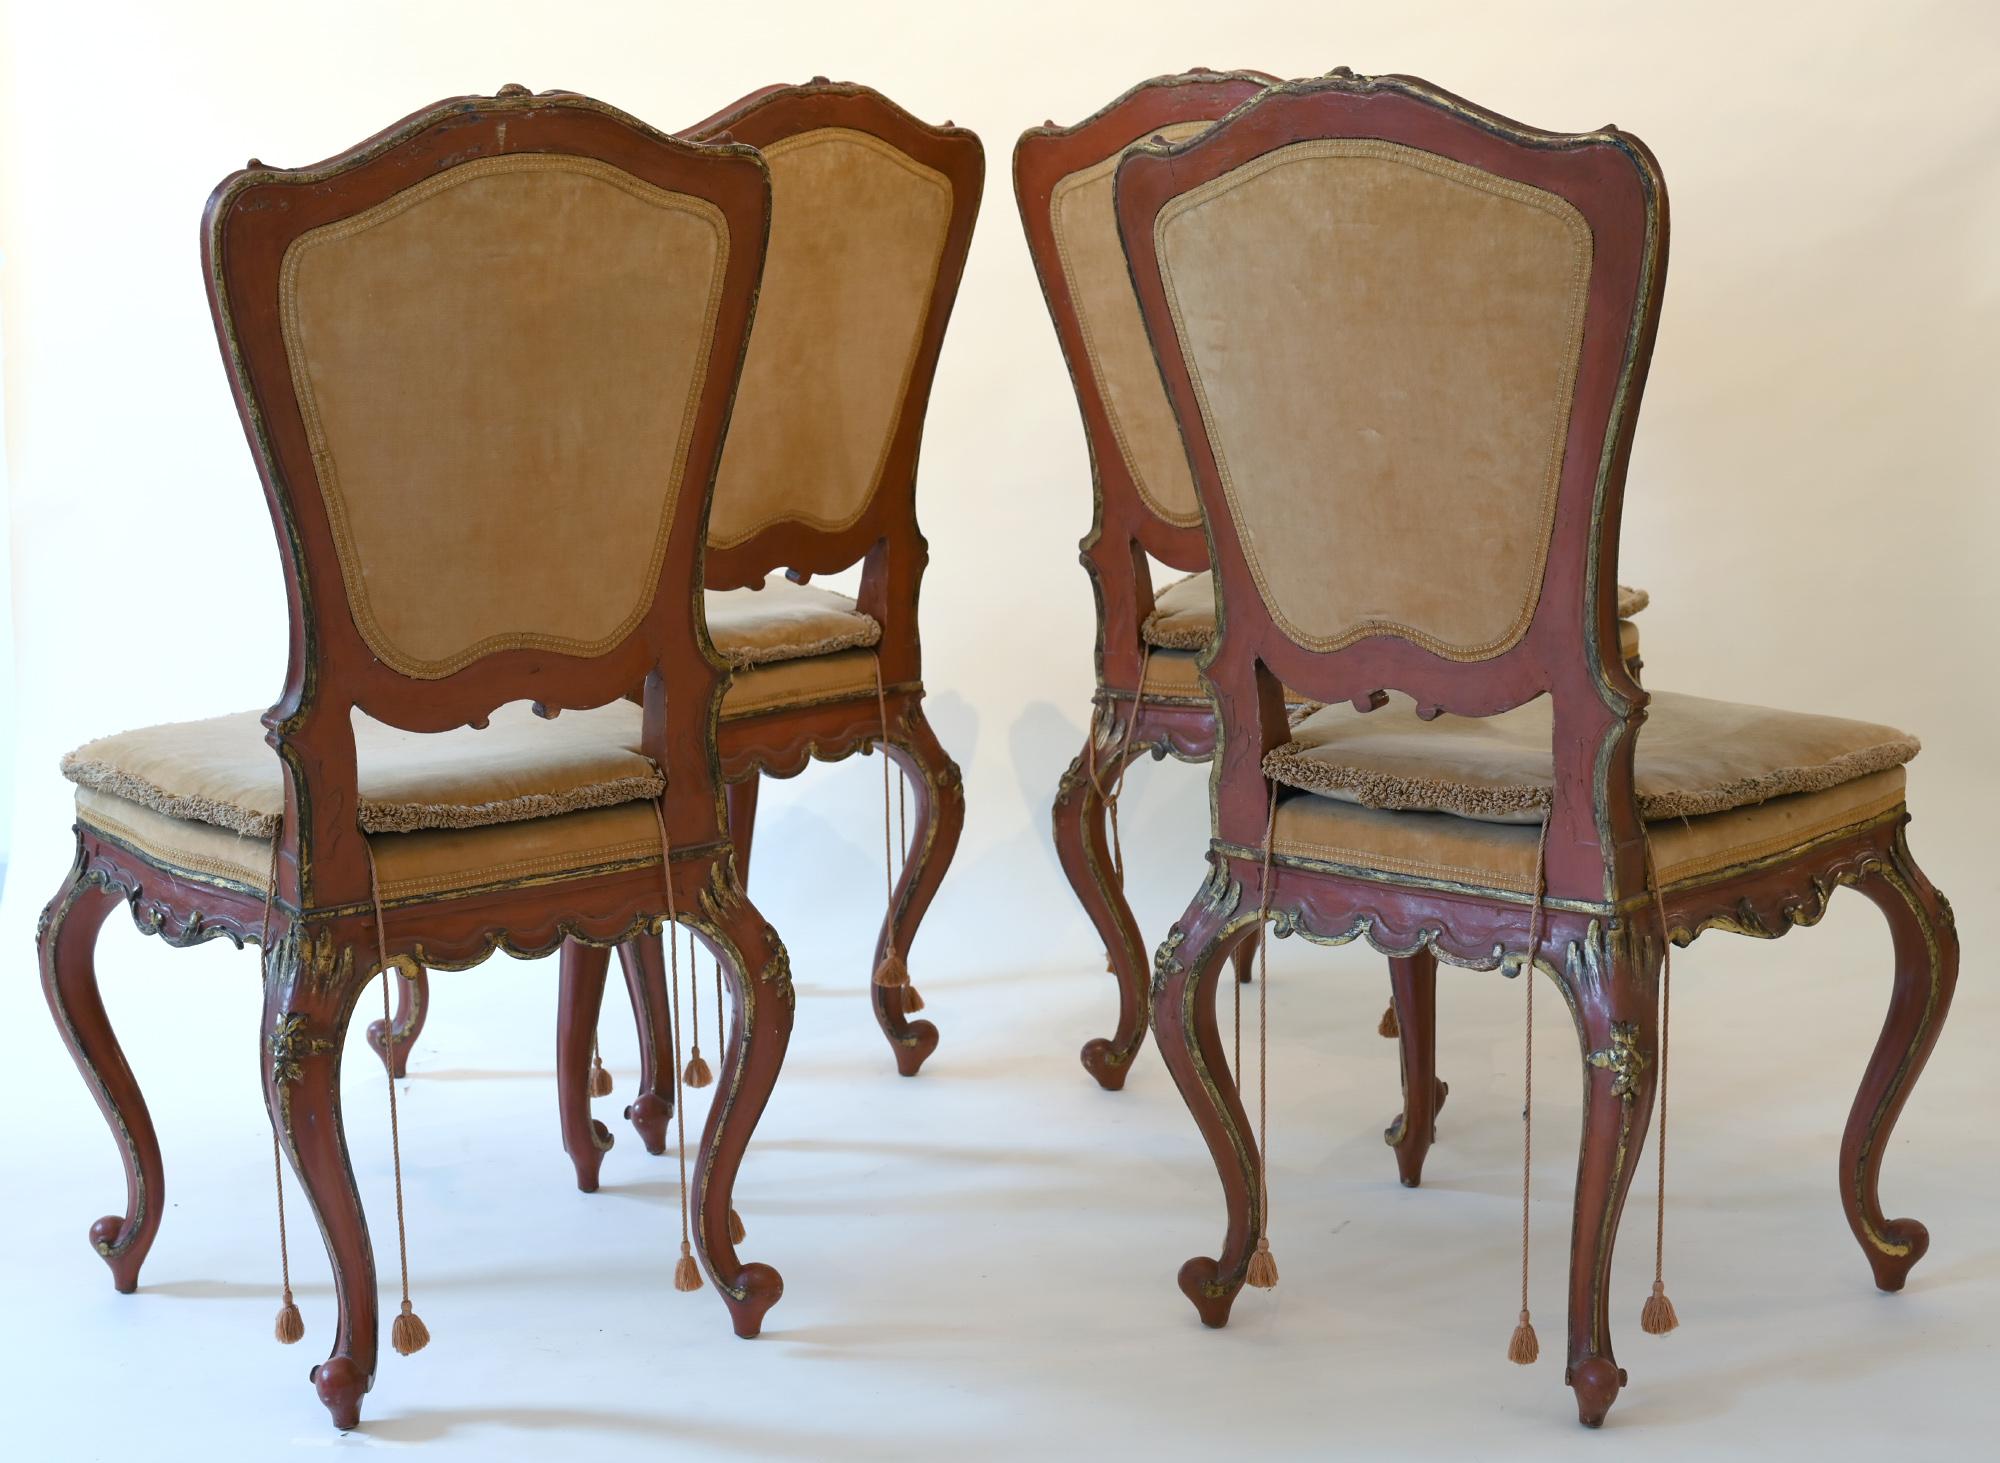 A set of four Venetian chairs 18th century red lacquered painted partially giltwood, Italy

A set of four very charming and rare chairs from Venice. The wood is red lacquered painted and some parts are giltwood. Very special is the fine carving